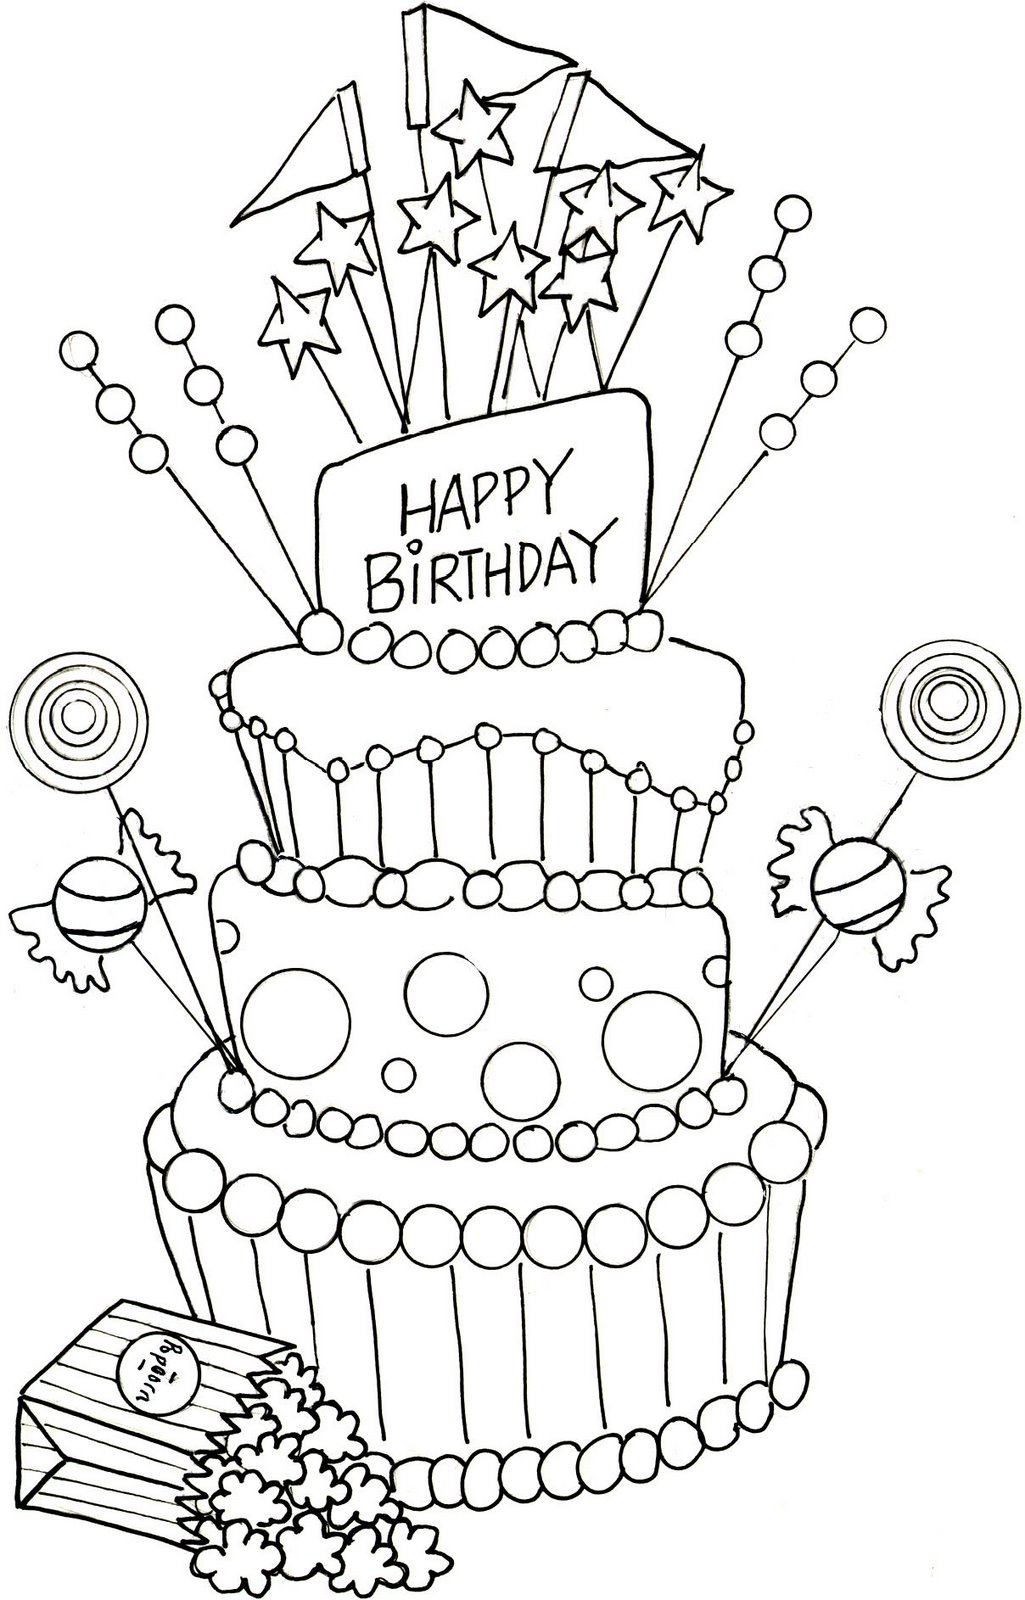 Happy Birthday Cake Drawing at GetDrawings | Free download